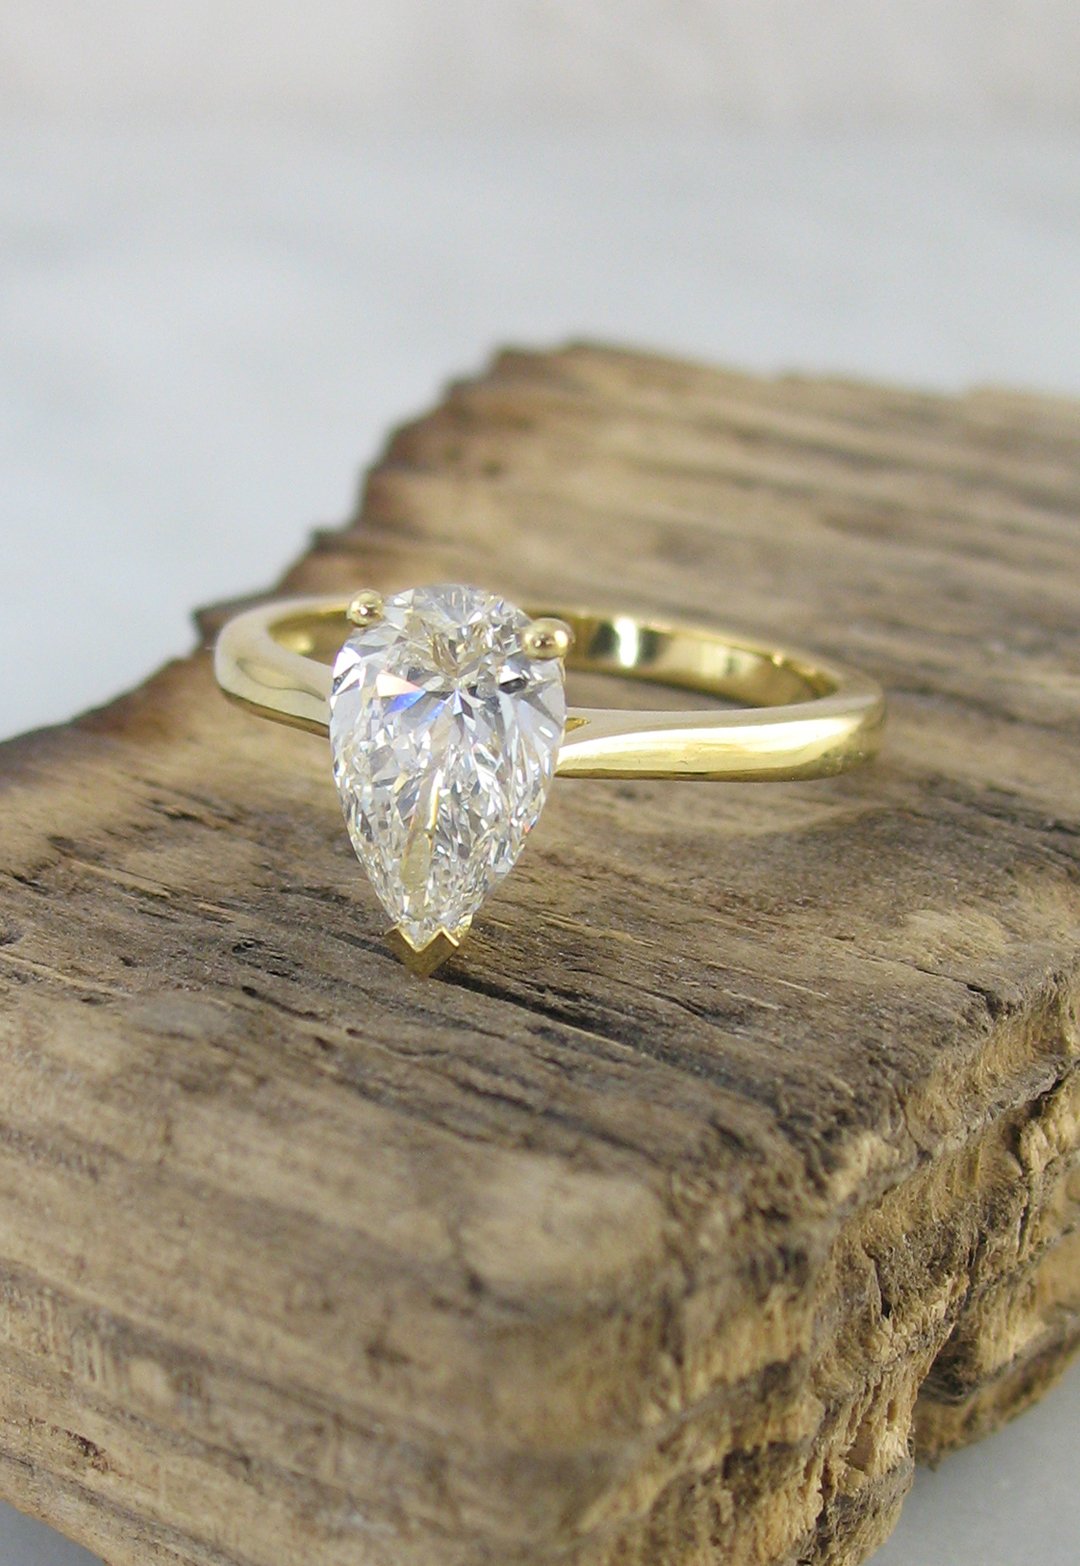 A classic pear-shaped diamond solitaire engagement ring